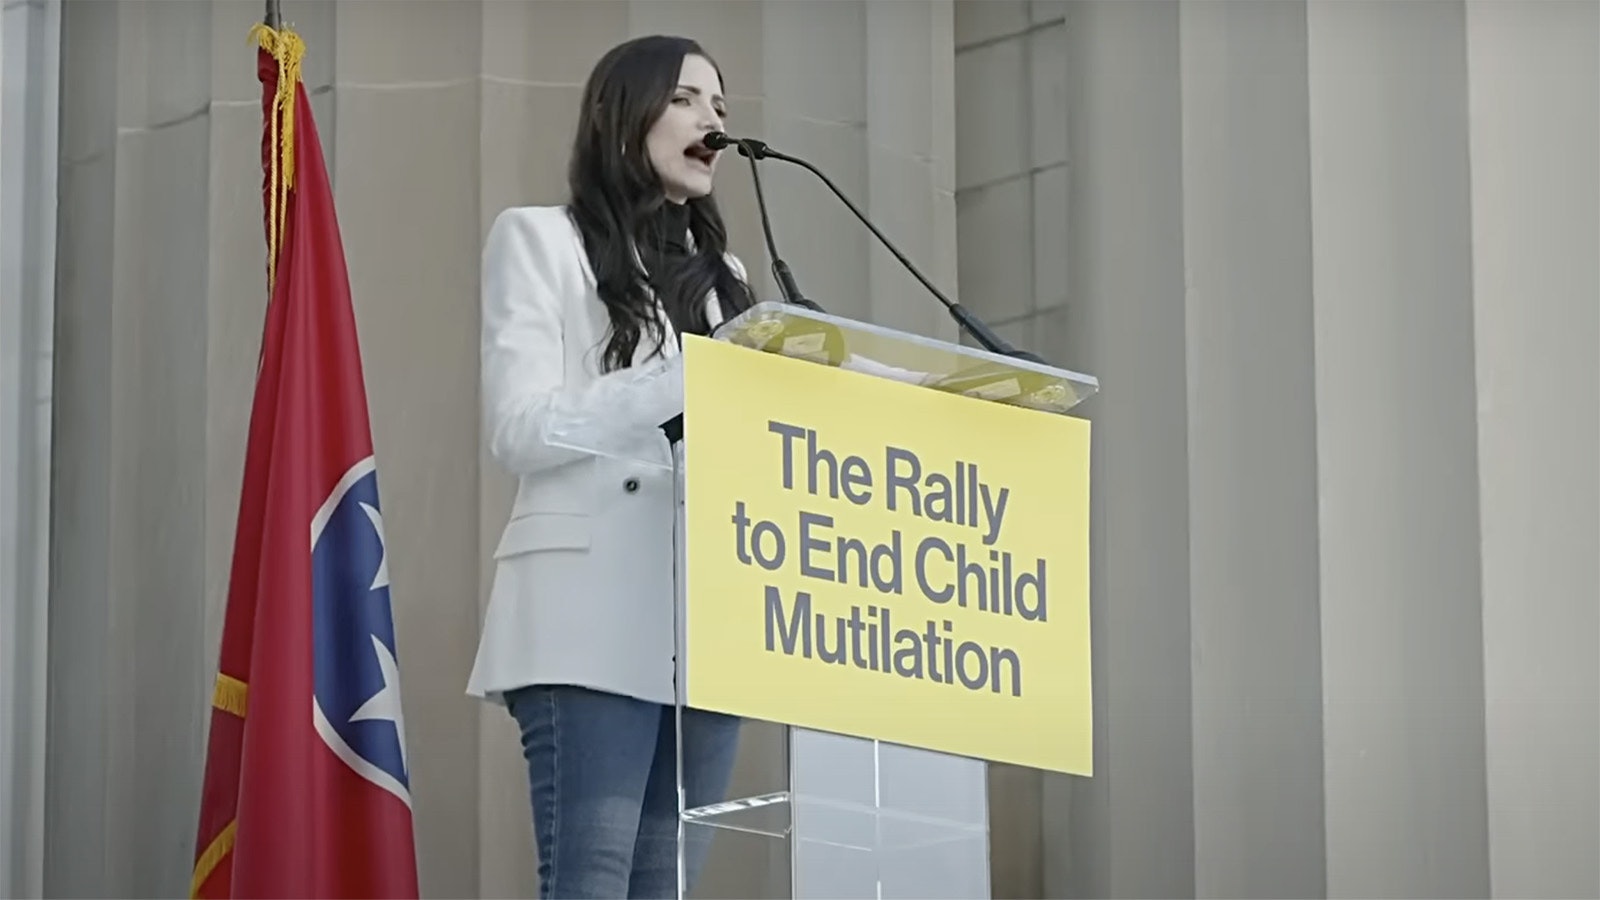 Rally to end child mutilation